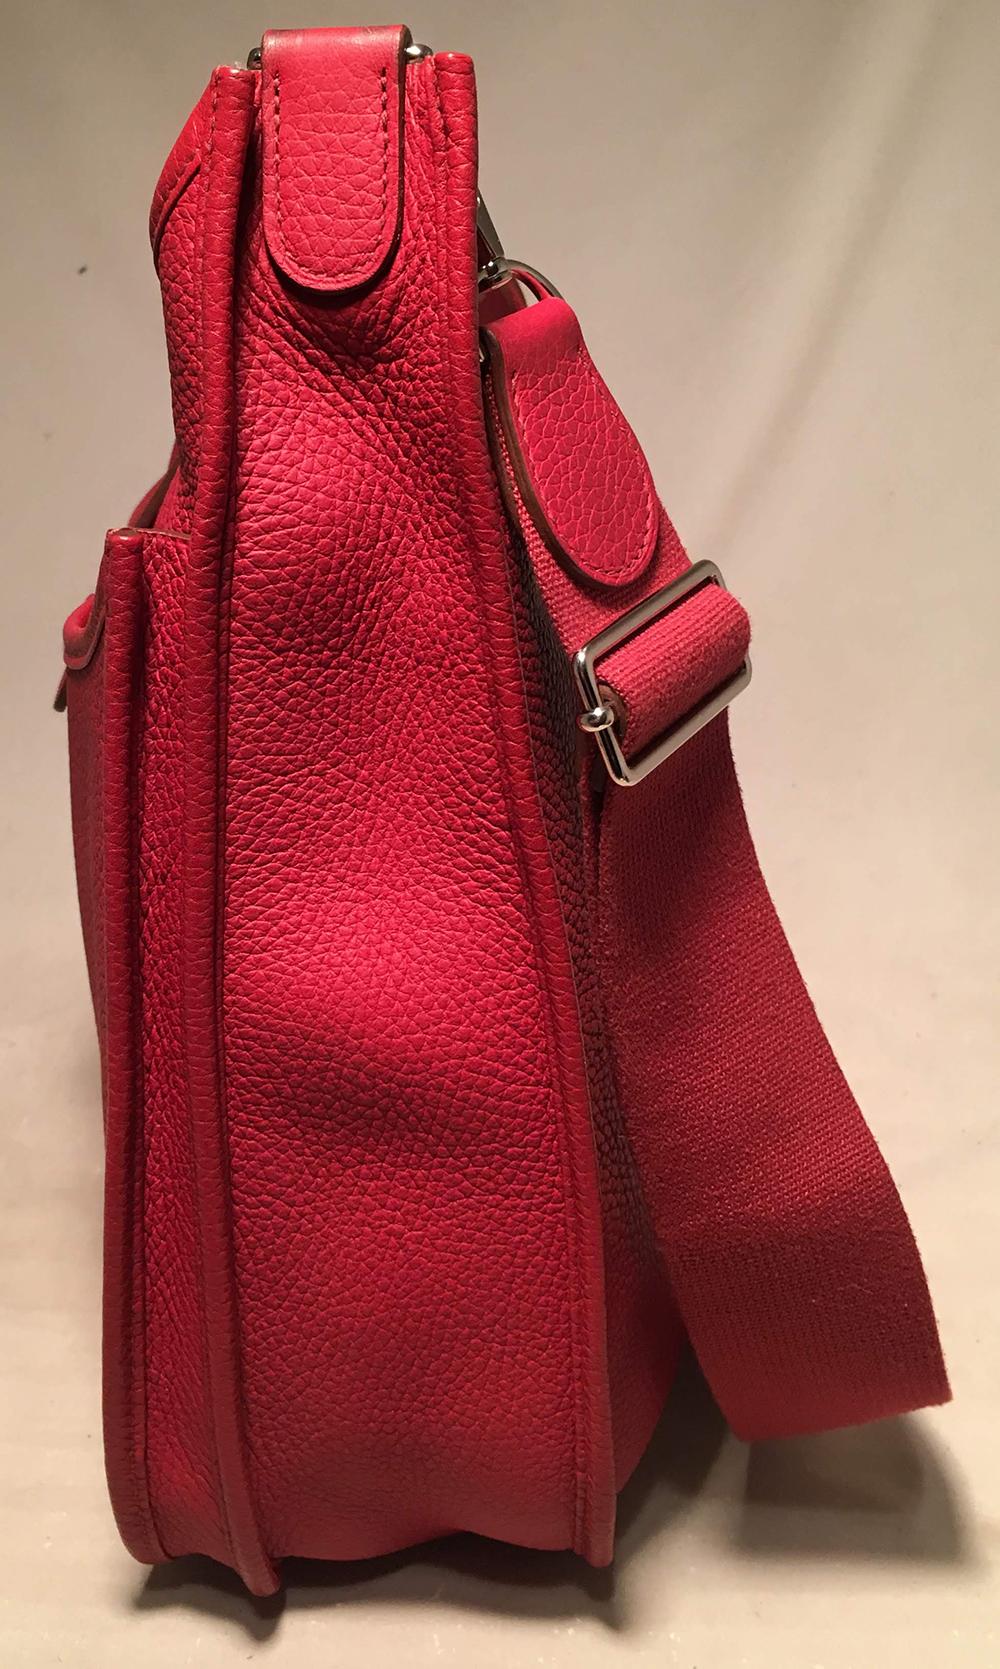 Hermes Rouge Red Togo Evelyne III GM 31cm Shoulder Bag in excellent condition. Rouge red togo leather exterior trimmed with silver palladium hardware. Back side gusset pocket. Top snap strap closure opens to a clean unlined interior. Matching rouge